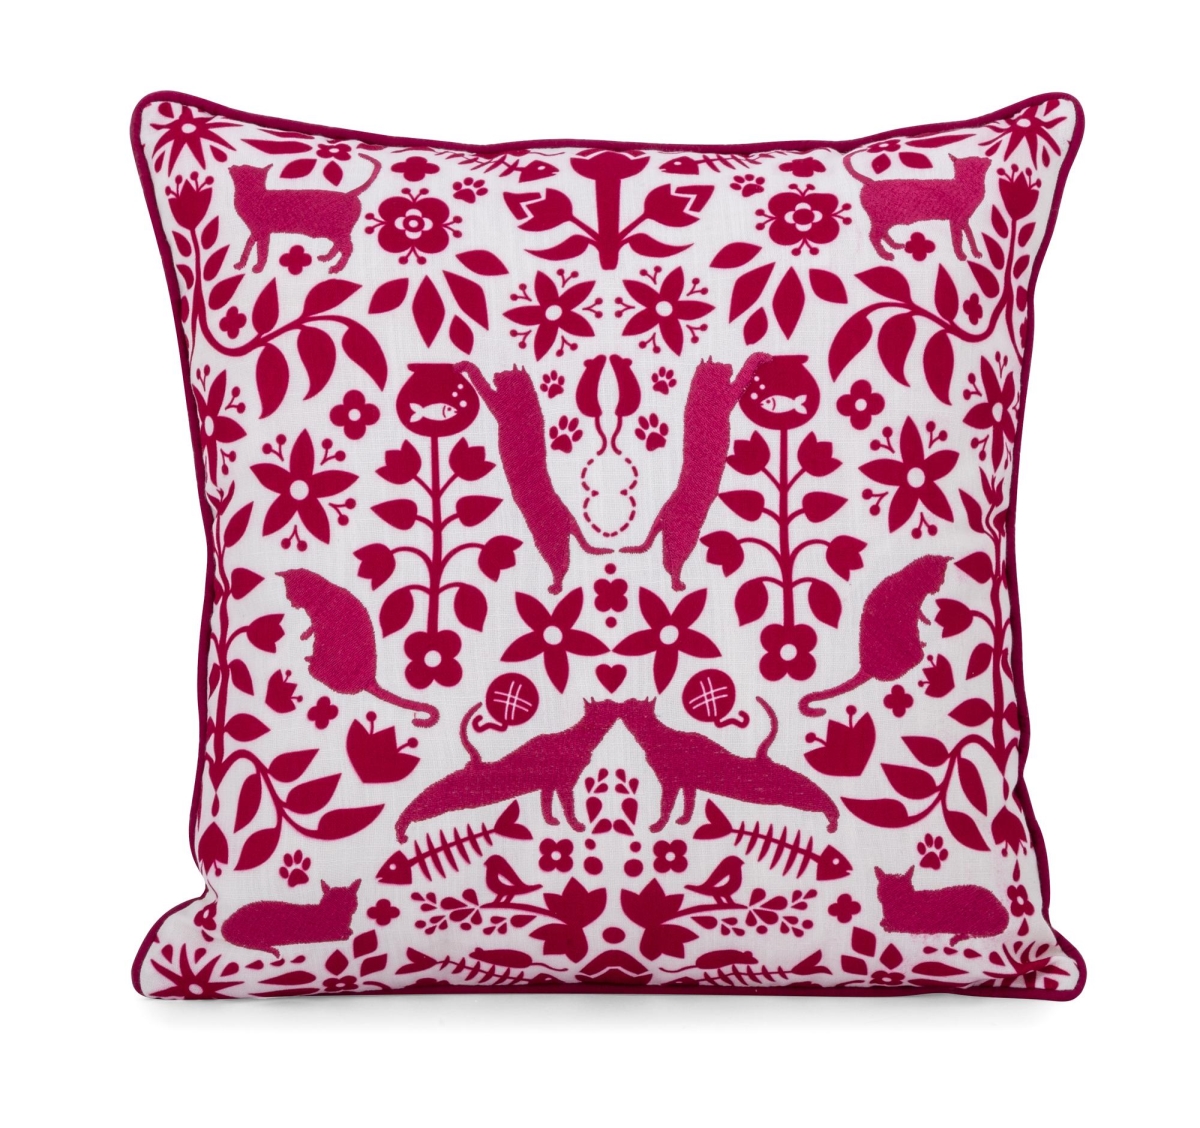 Imax 90586 16 X 16 In. Otomi Cat Pillow